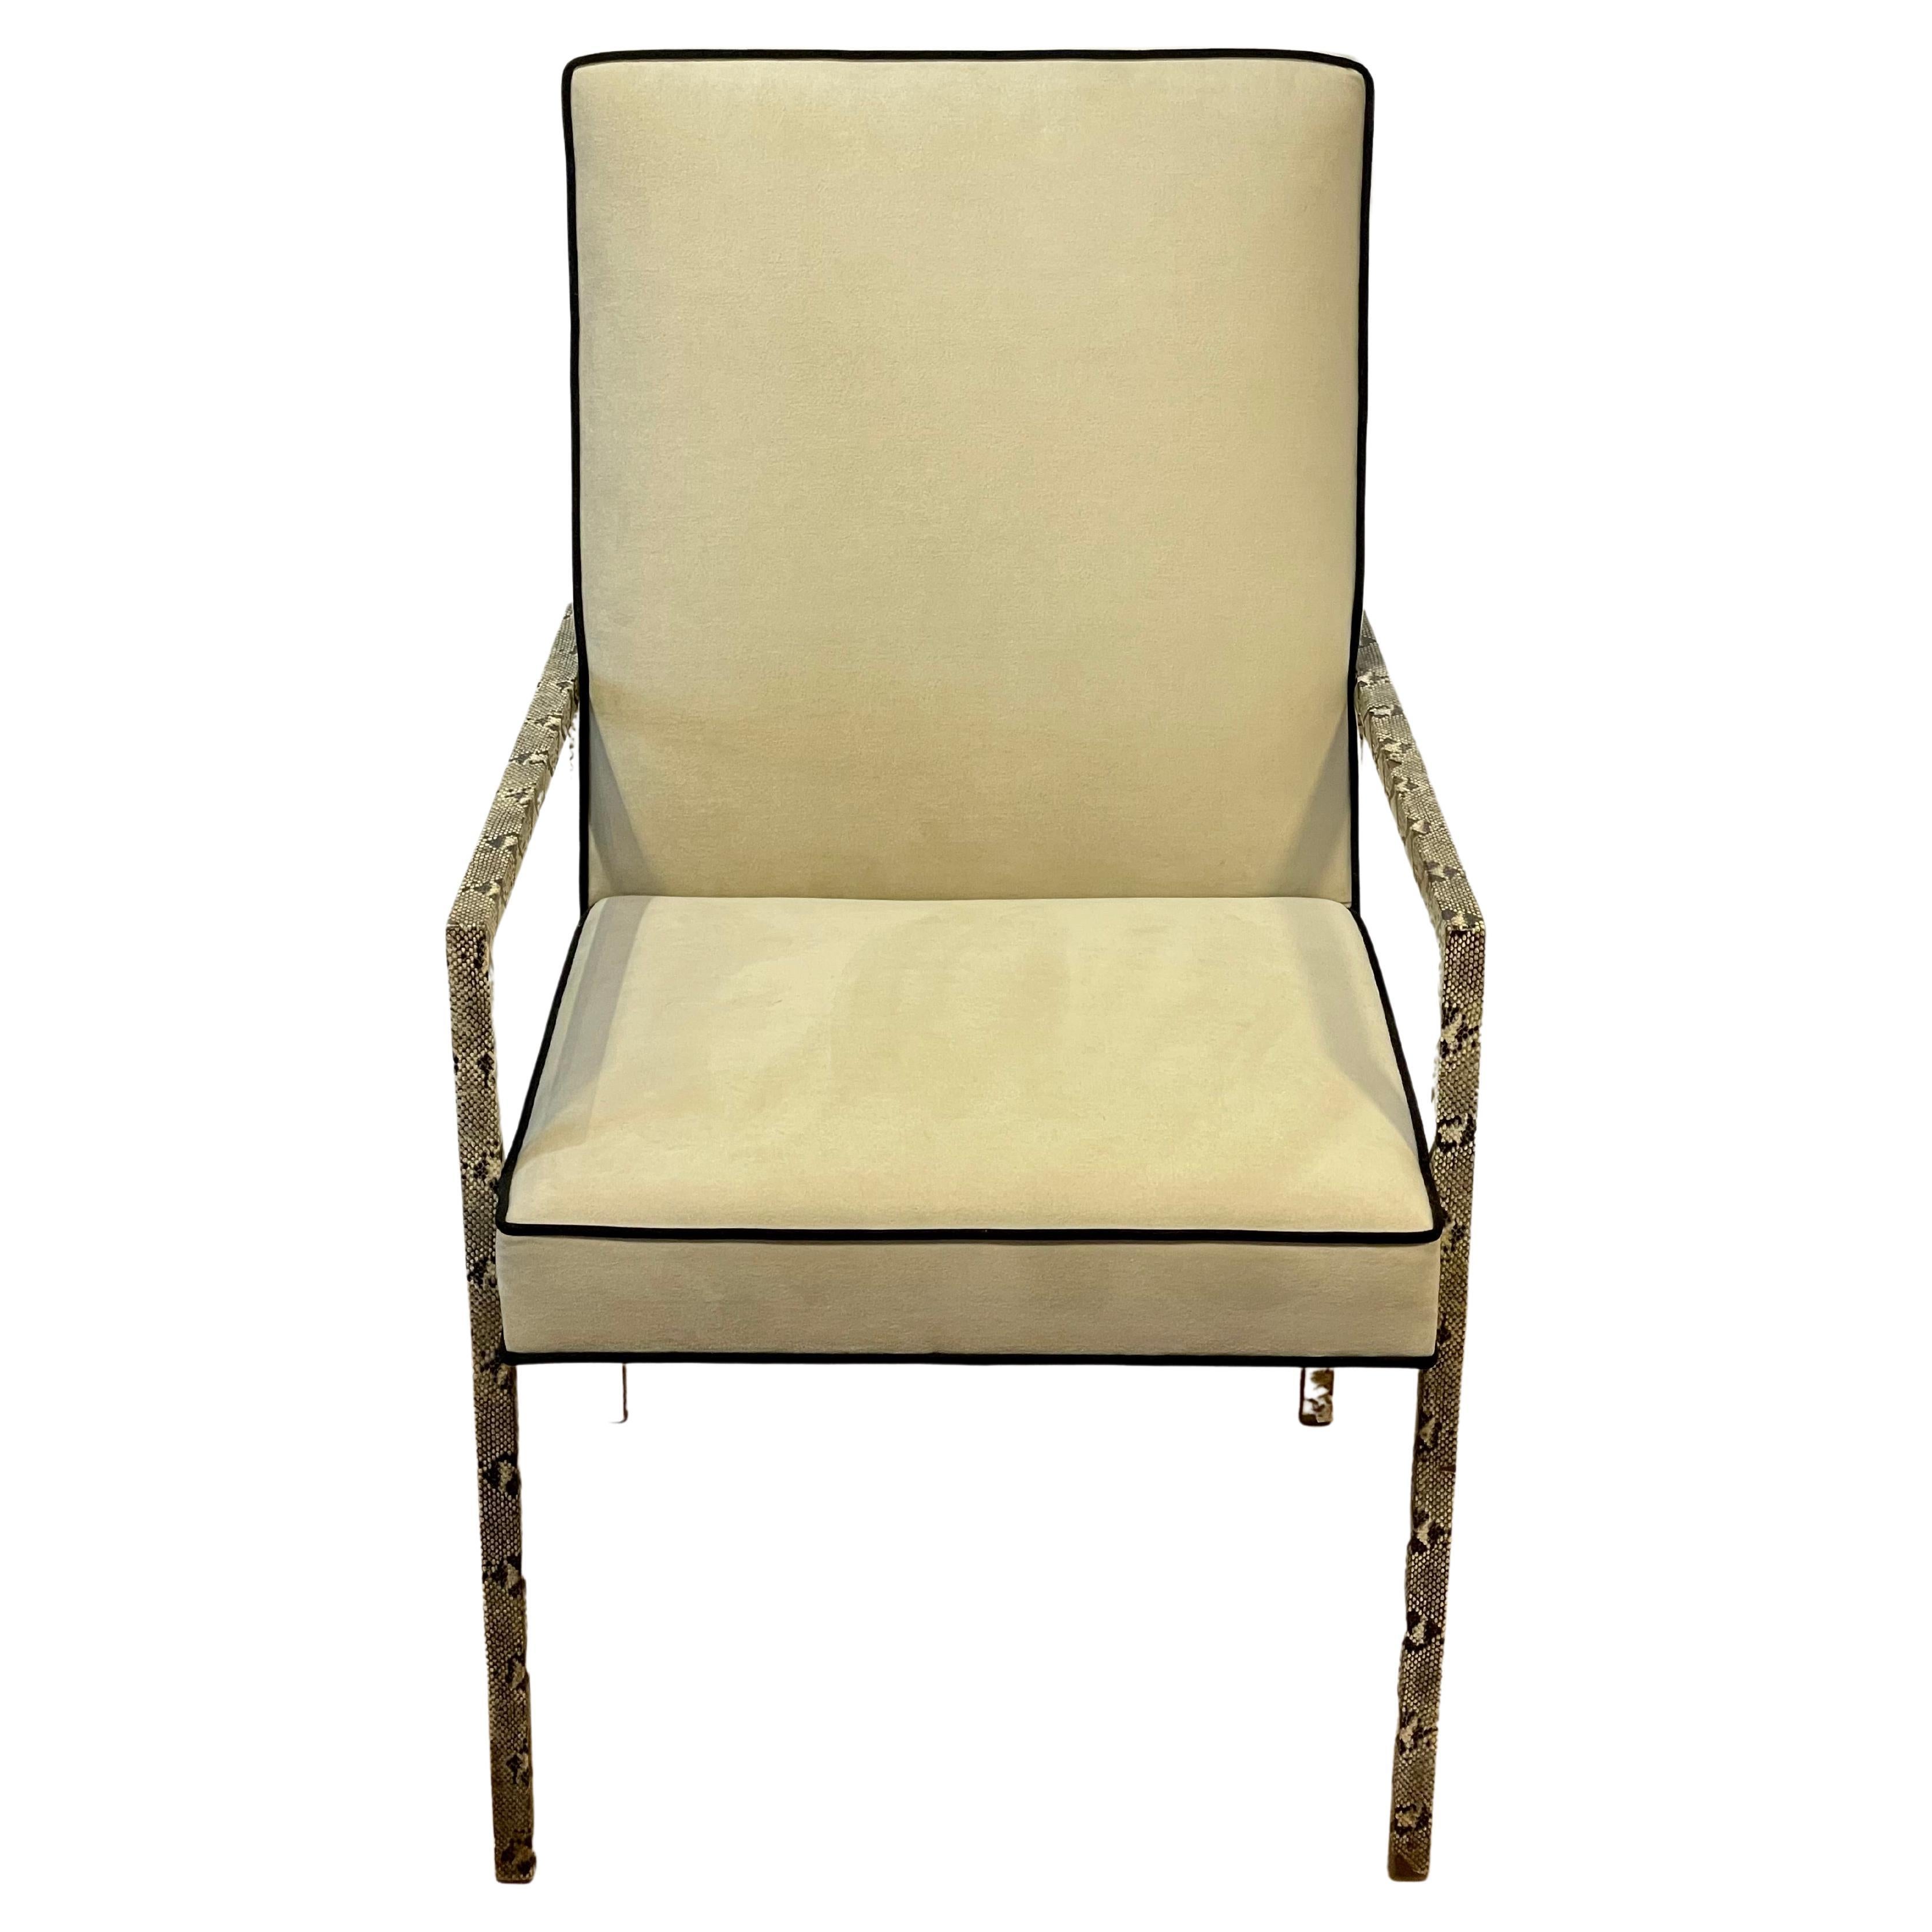 Steve Chase designed set of dining chairs with steel legs, wrapped in original faux python unbiased leather. Newly upholstered seats in beige Ultrasuede with chocolate Ultrasuede piping. Can be sold in 2 sets of 6.